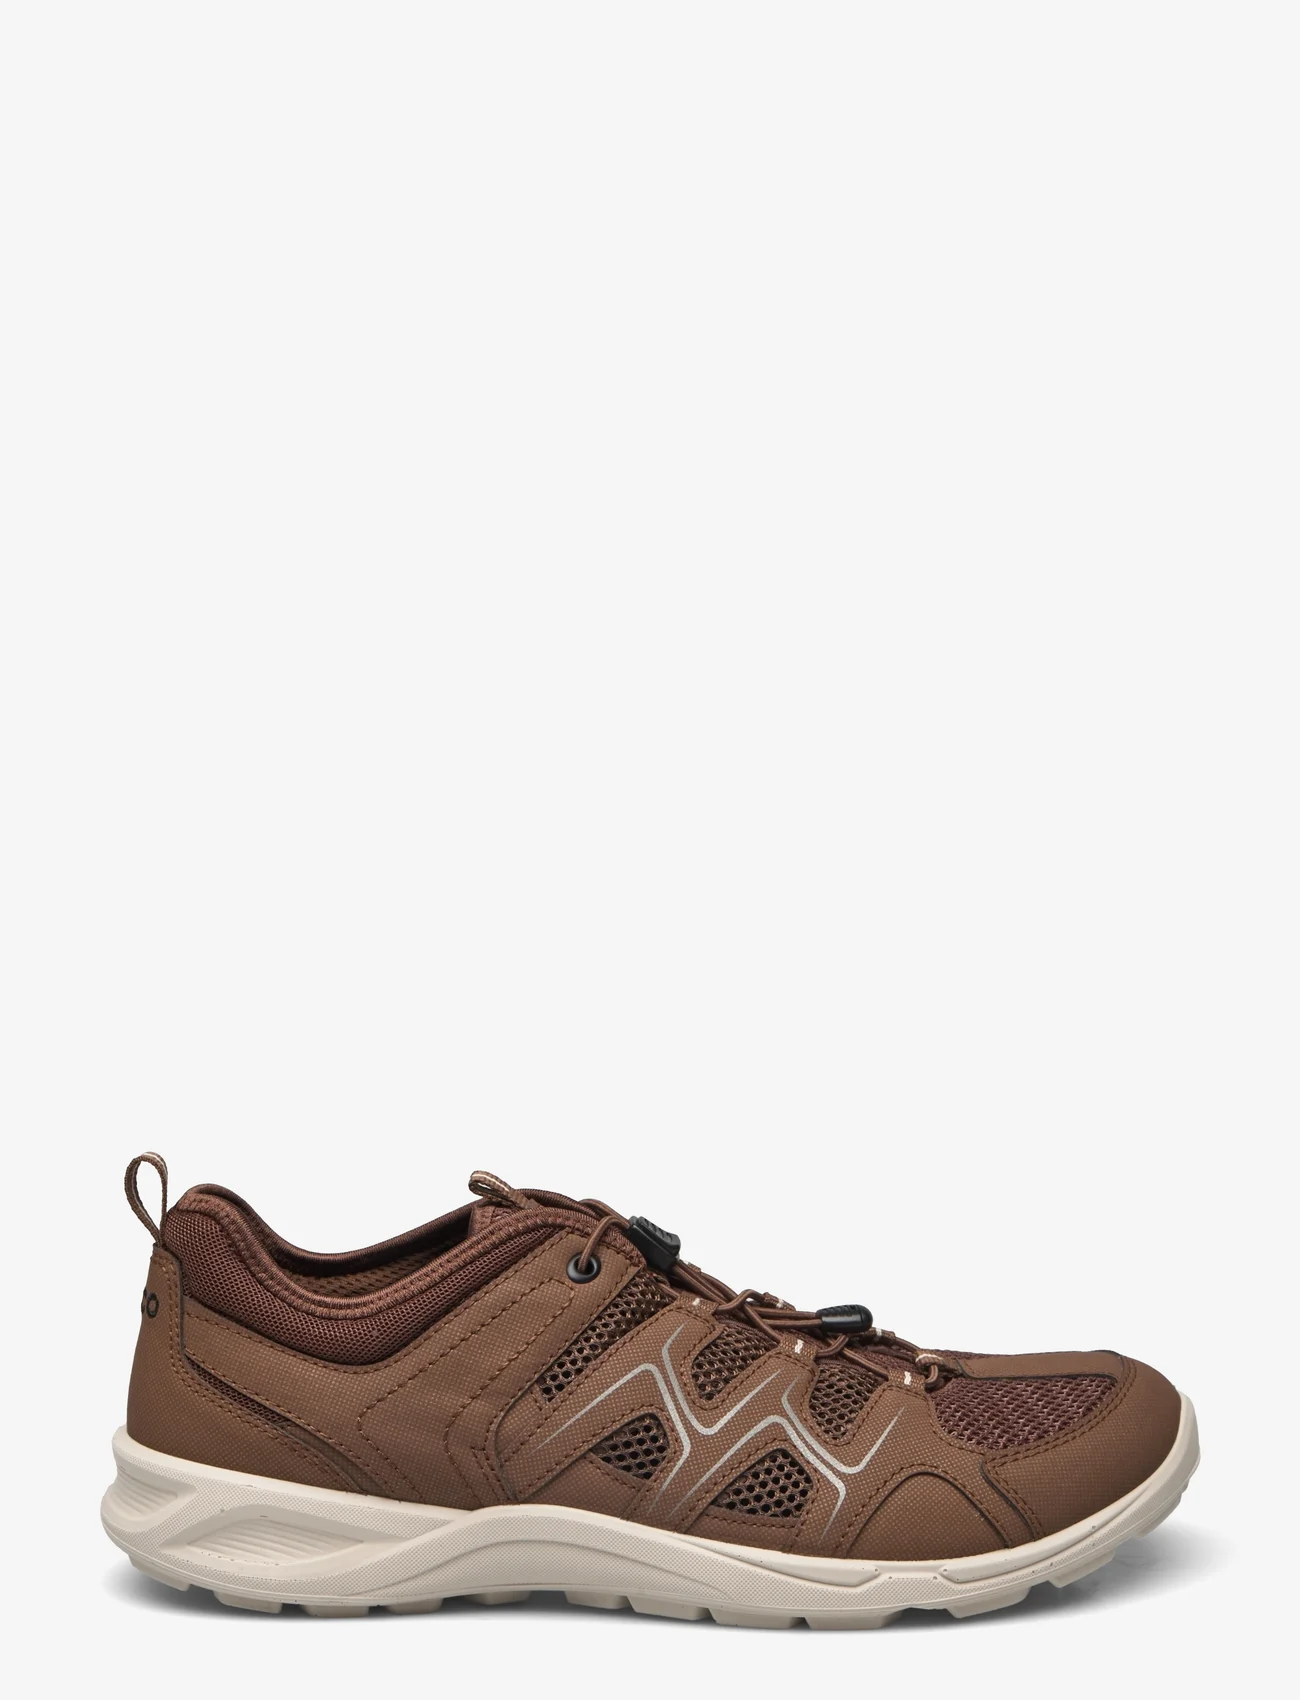 ECCO - TERRACRUISE LT M - hiking shoes - cocoa brown/cocoa brown - 1